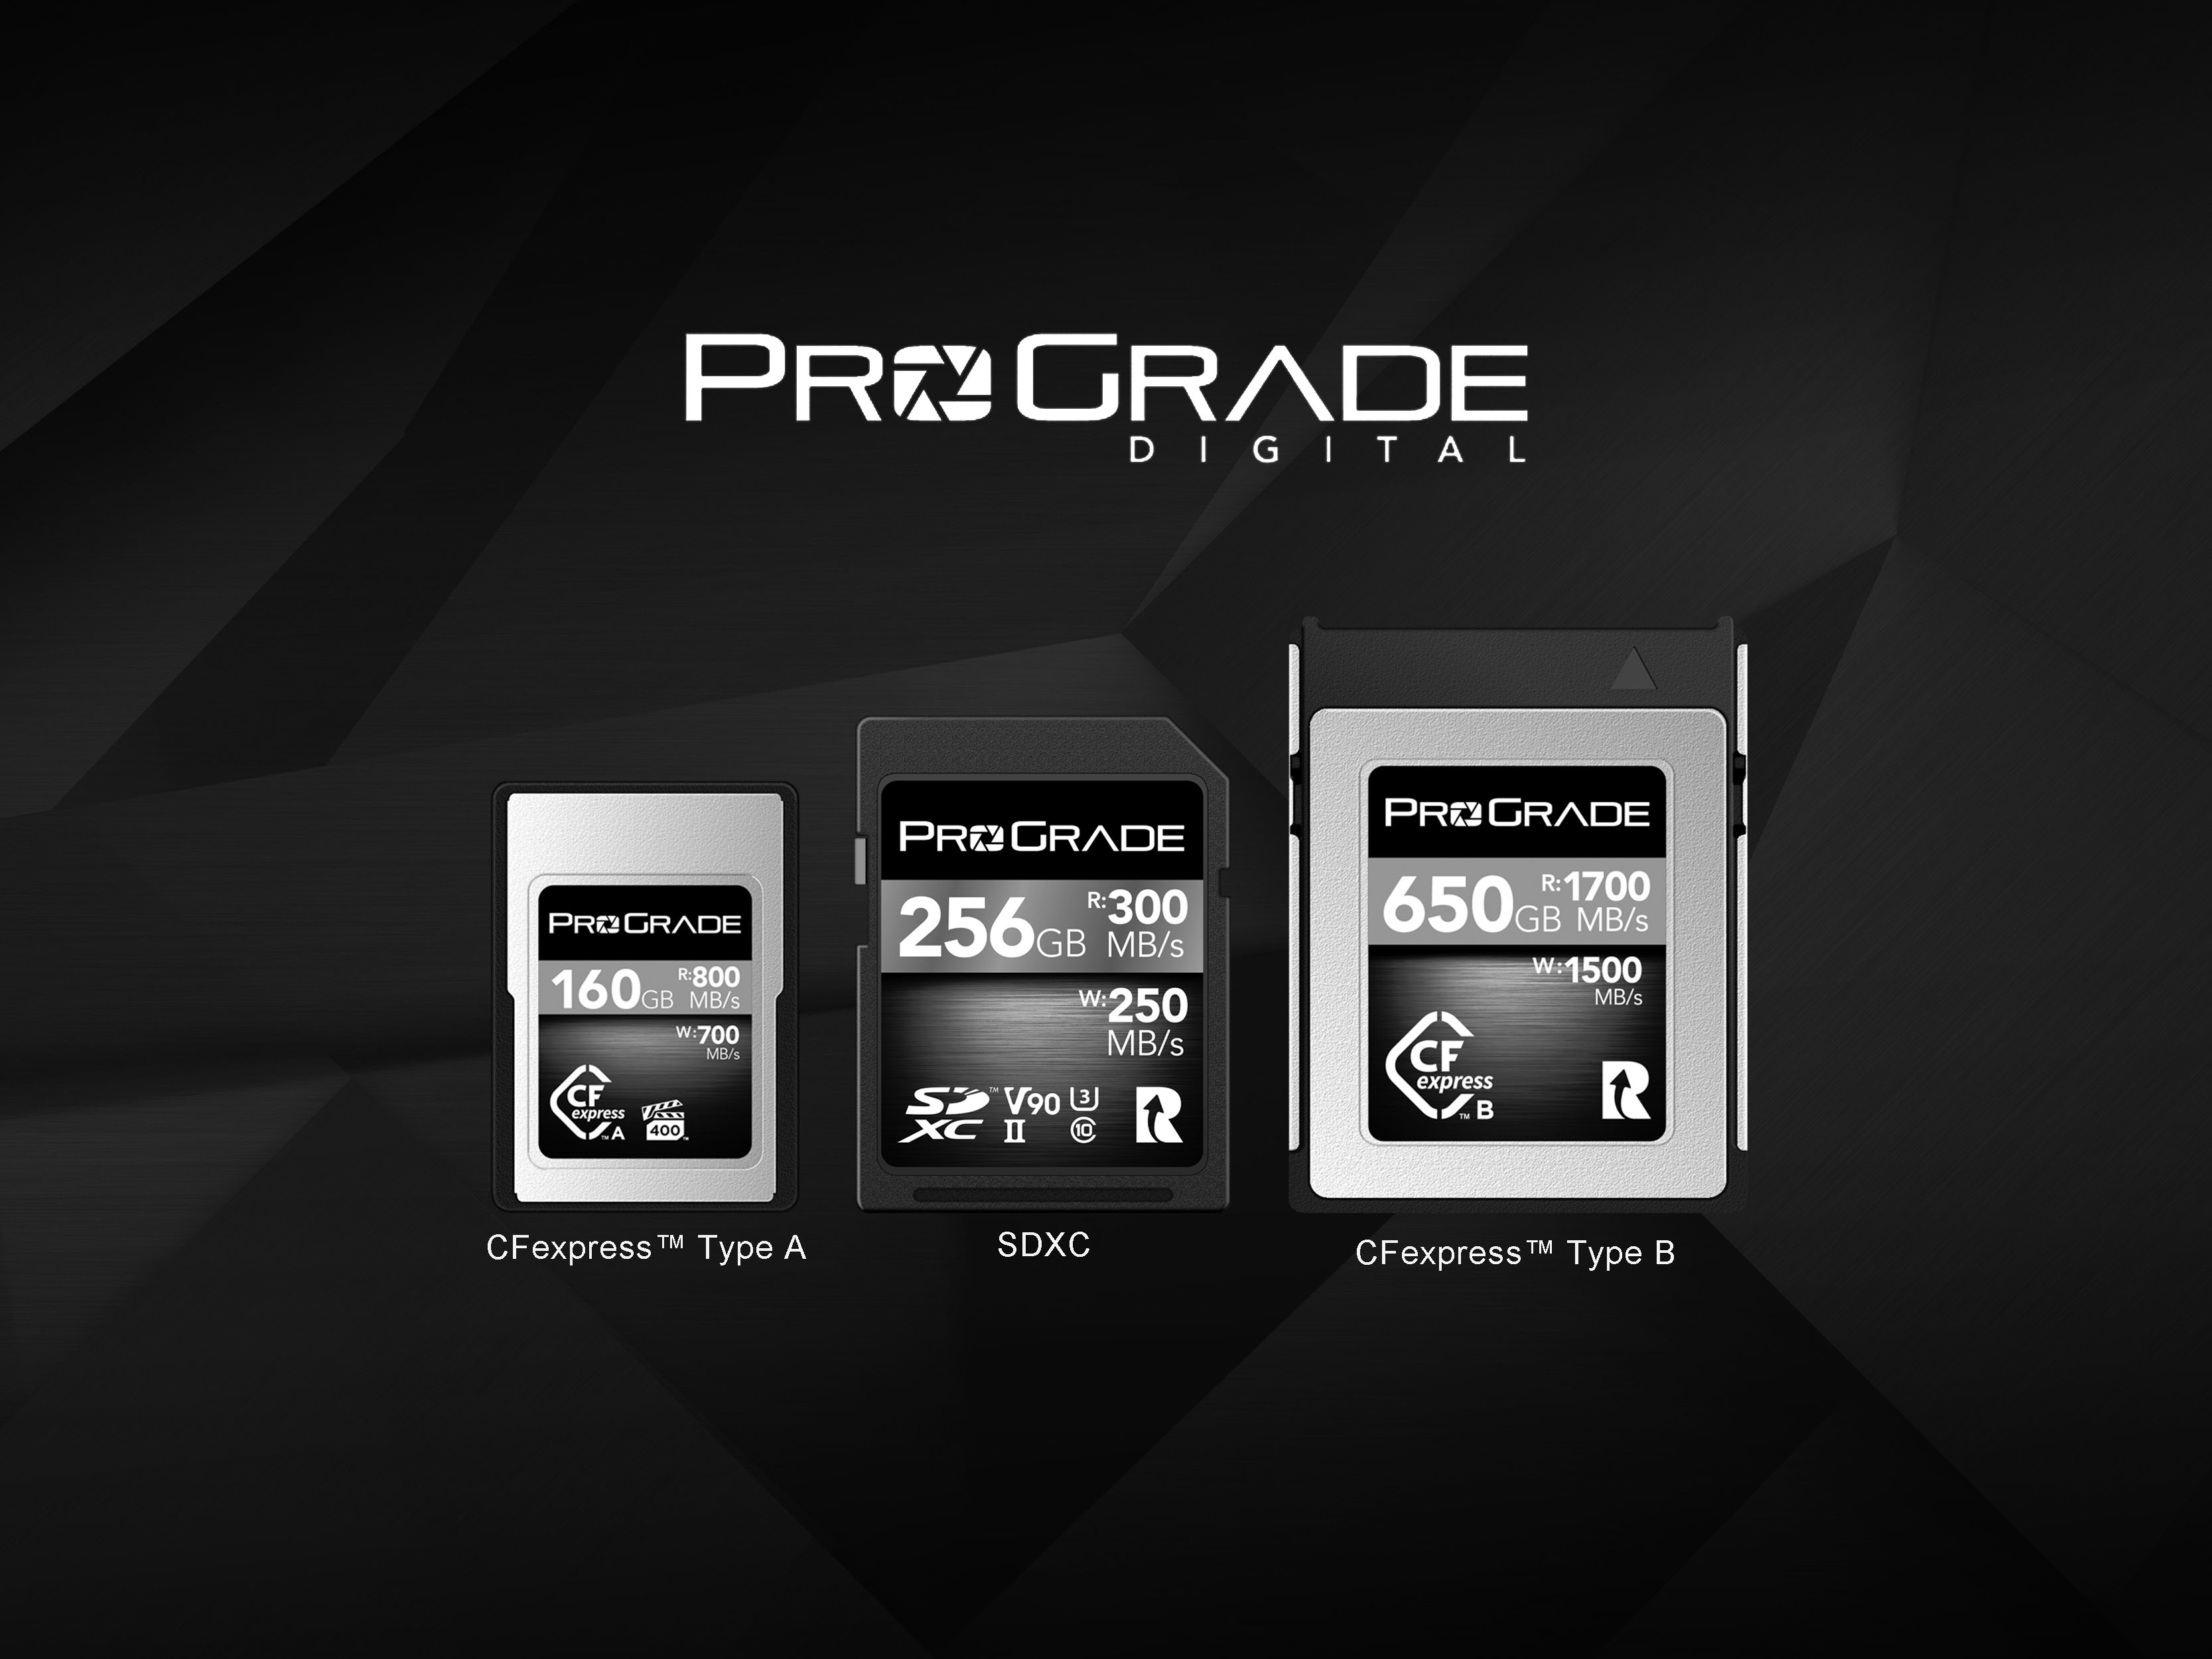 The New ProGrade Digital CFexpress Type A Have 800/MBs Read Speed